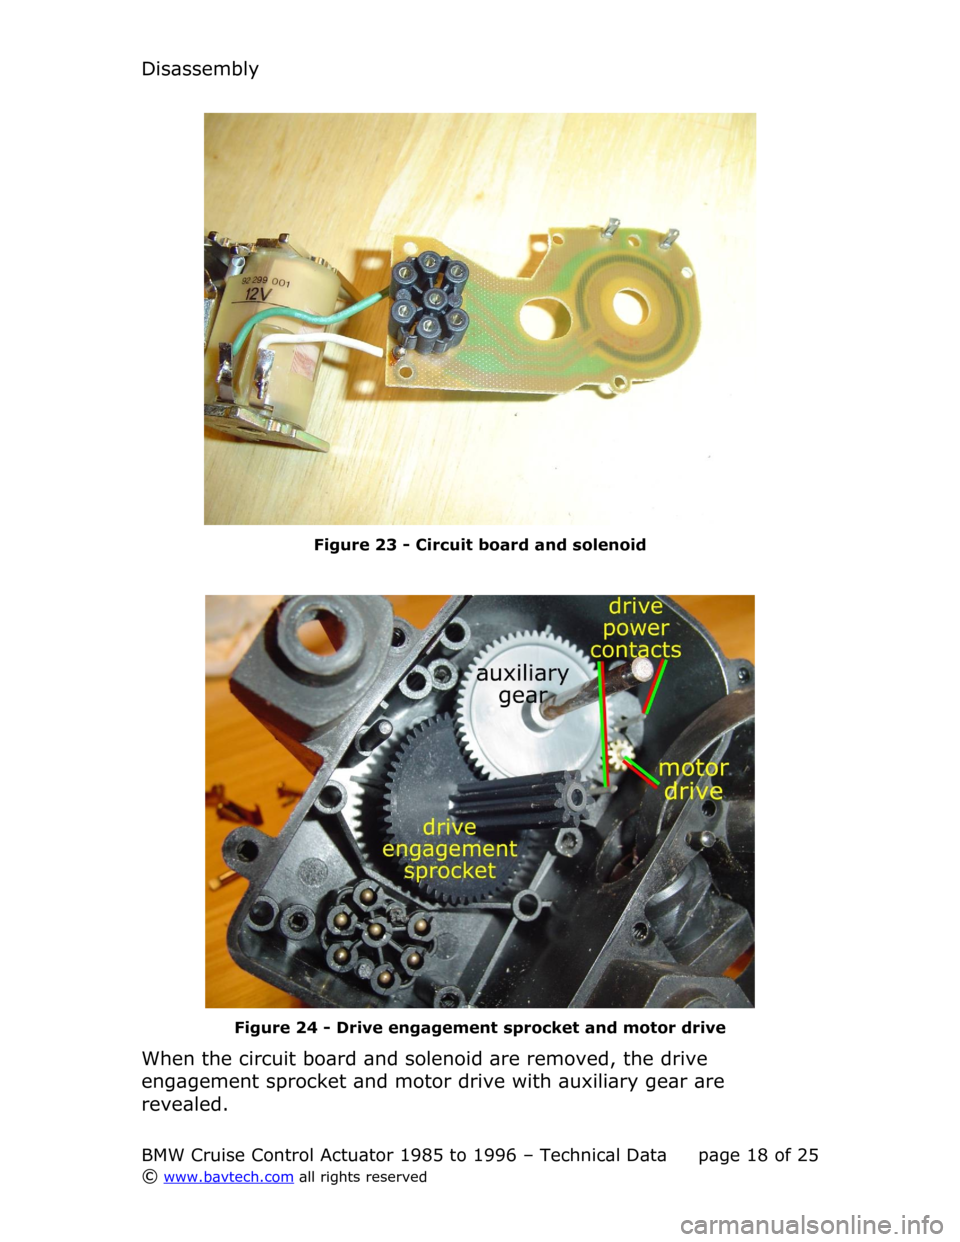 BMW 3 SERIES 1992 E36 Cruise Control Acutator Disassembly
Figure  23  - Circuit board and solenoid
Figure  24  - Drive engagement sprocket and motor drive
When the circuit board and solenoid are removed, the drive  
engagement sprocket and motor 